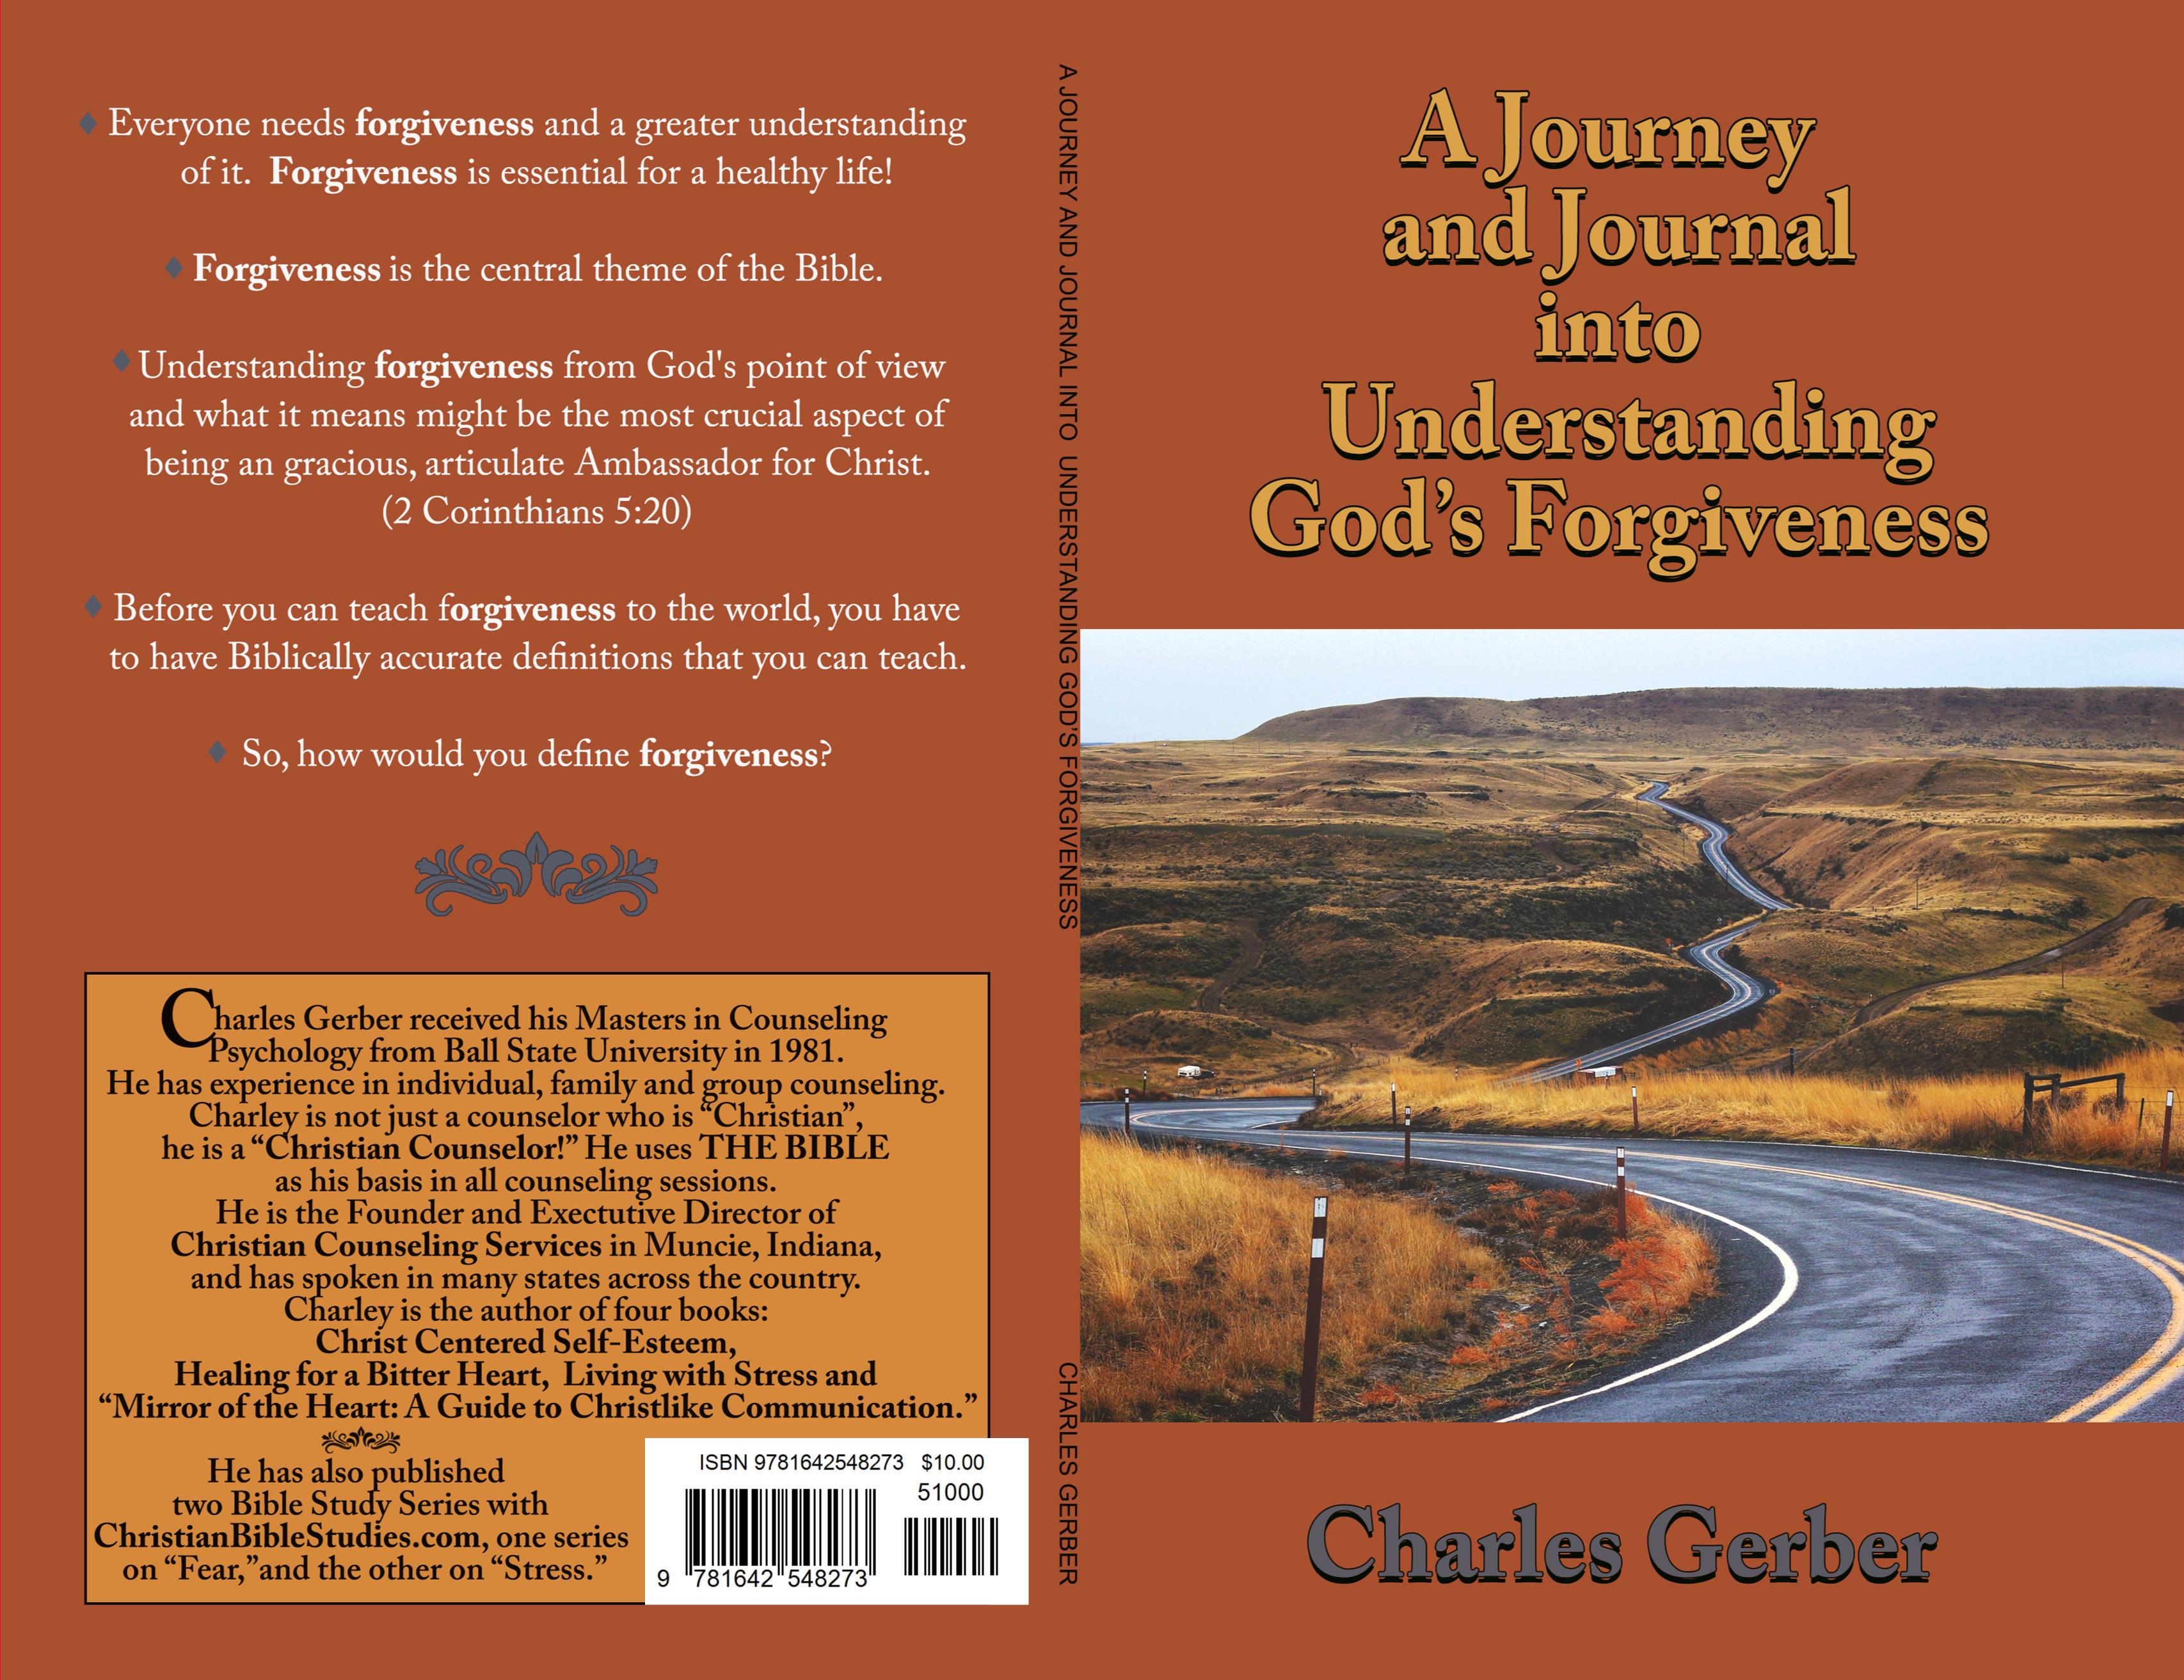 A Journal and Journey into Understanding God’s Forgiveness cover image